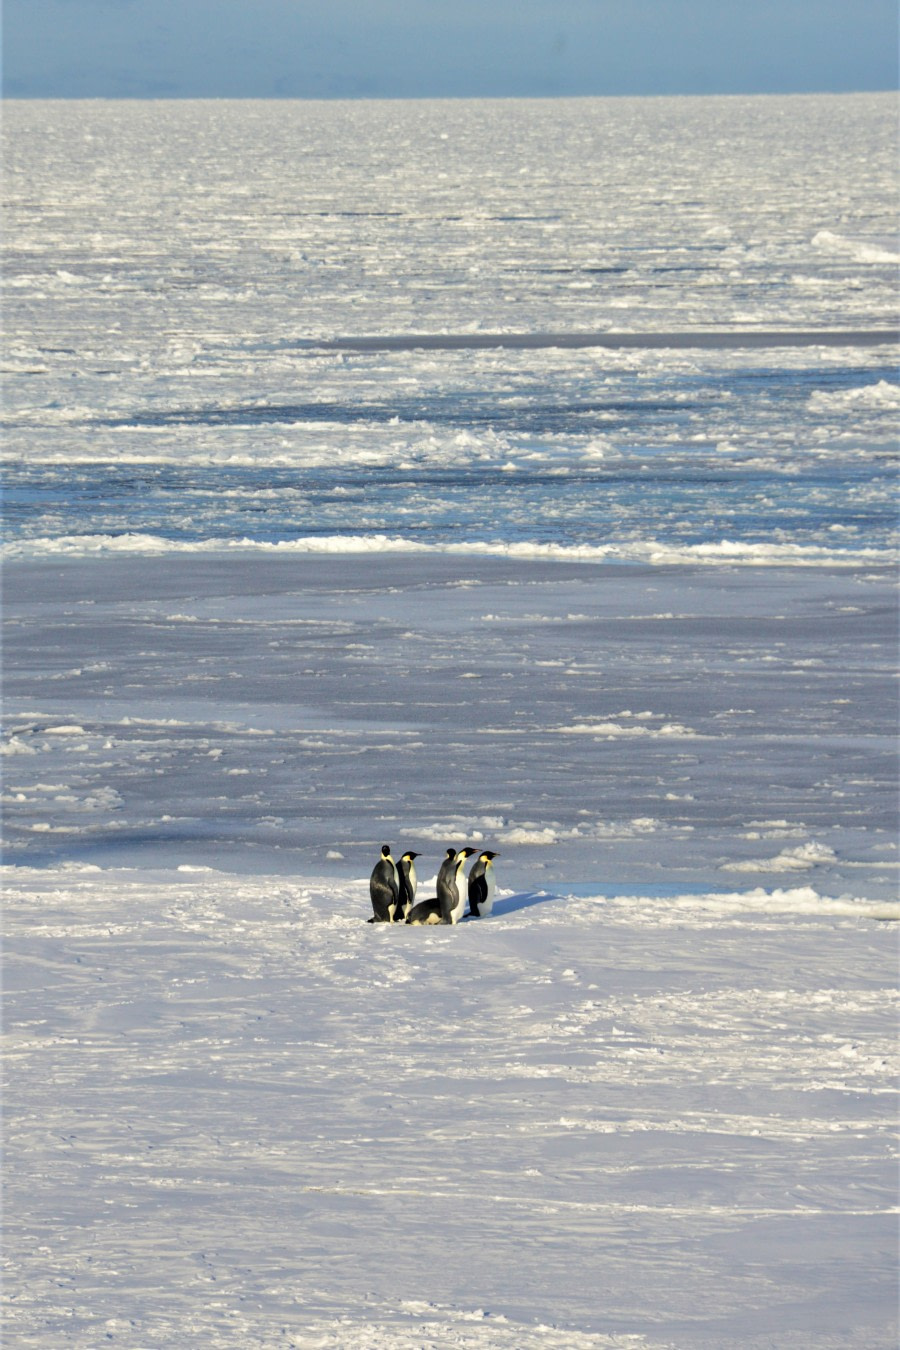 OTL28-20, 20200301-Gary-Emperors on lonely ice Gary Miller - Oceanwide Expeditions.JPG